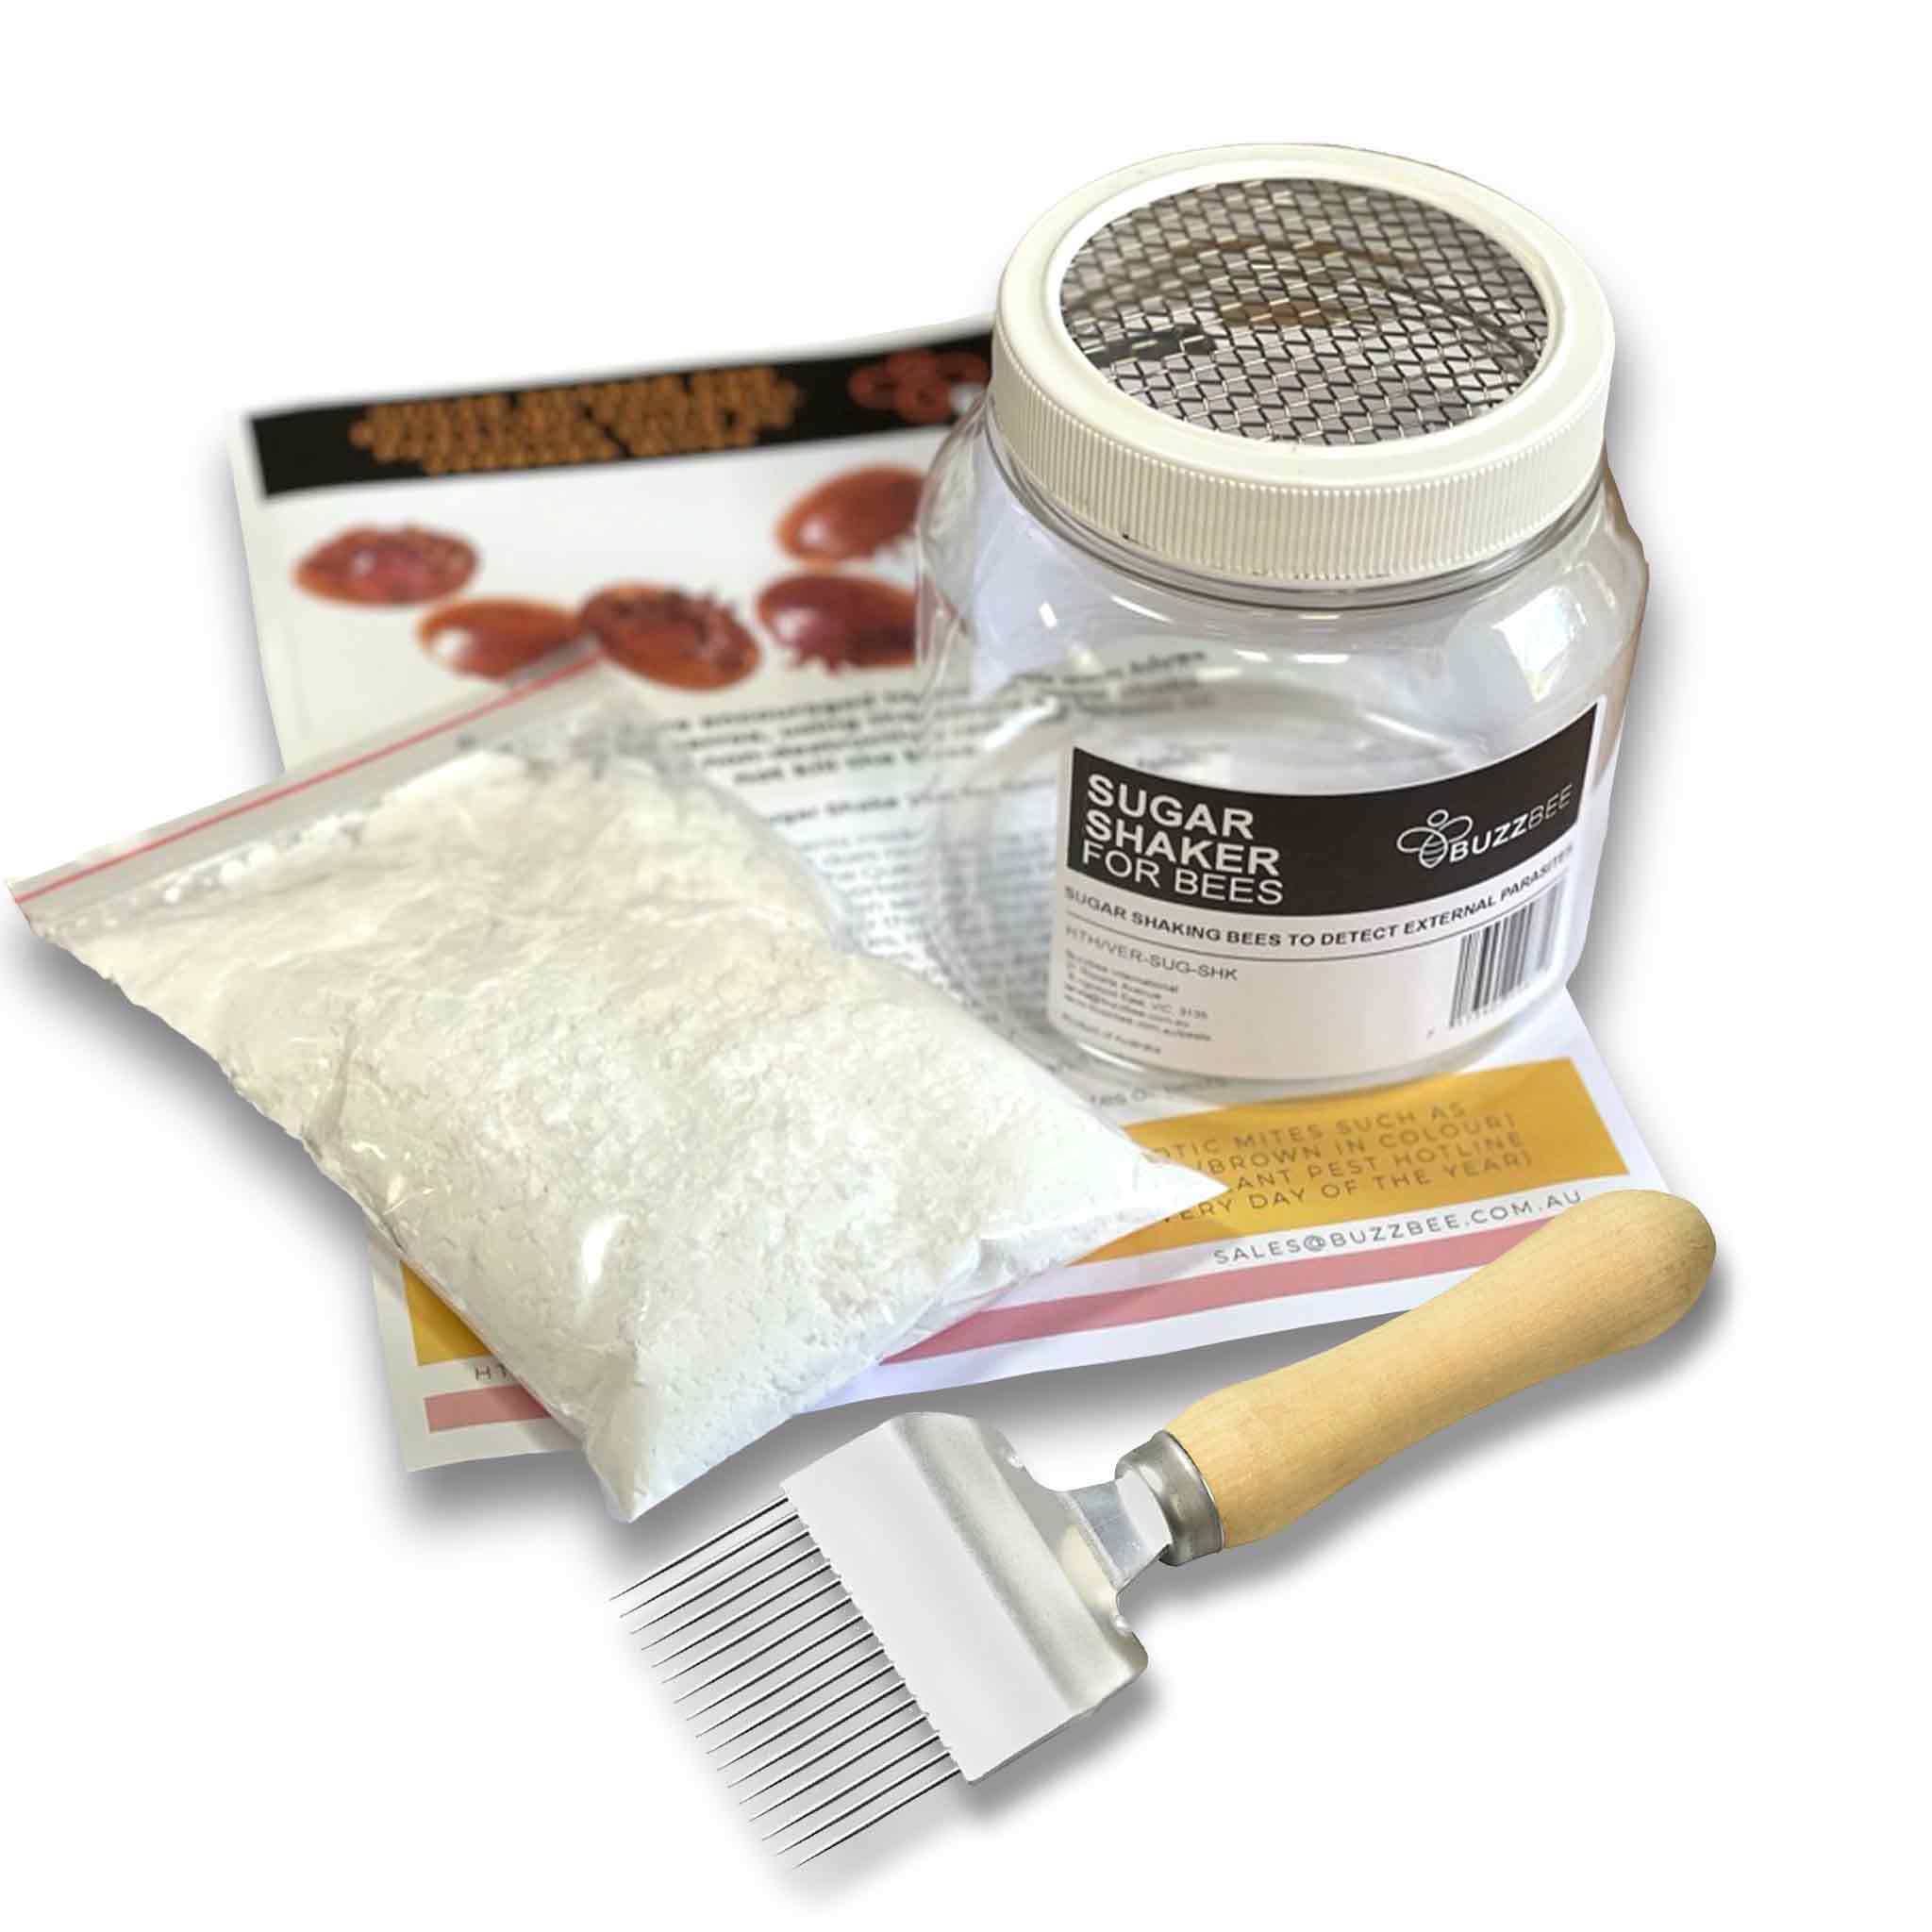 Varroa Mite Testing Kit including Sugar Shaker and Uncapping Fork - Health collection by Buzzbee Beekeeping Supplies